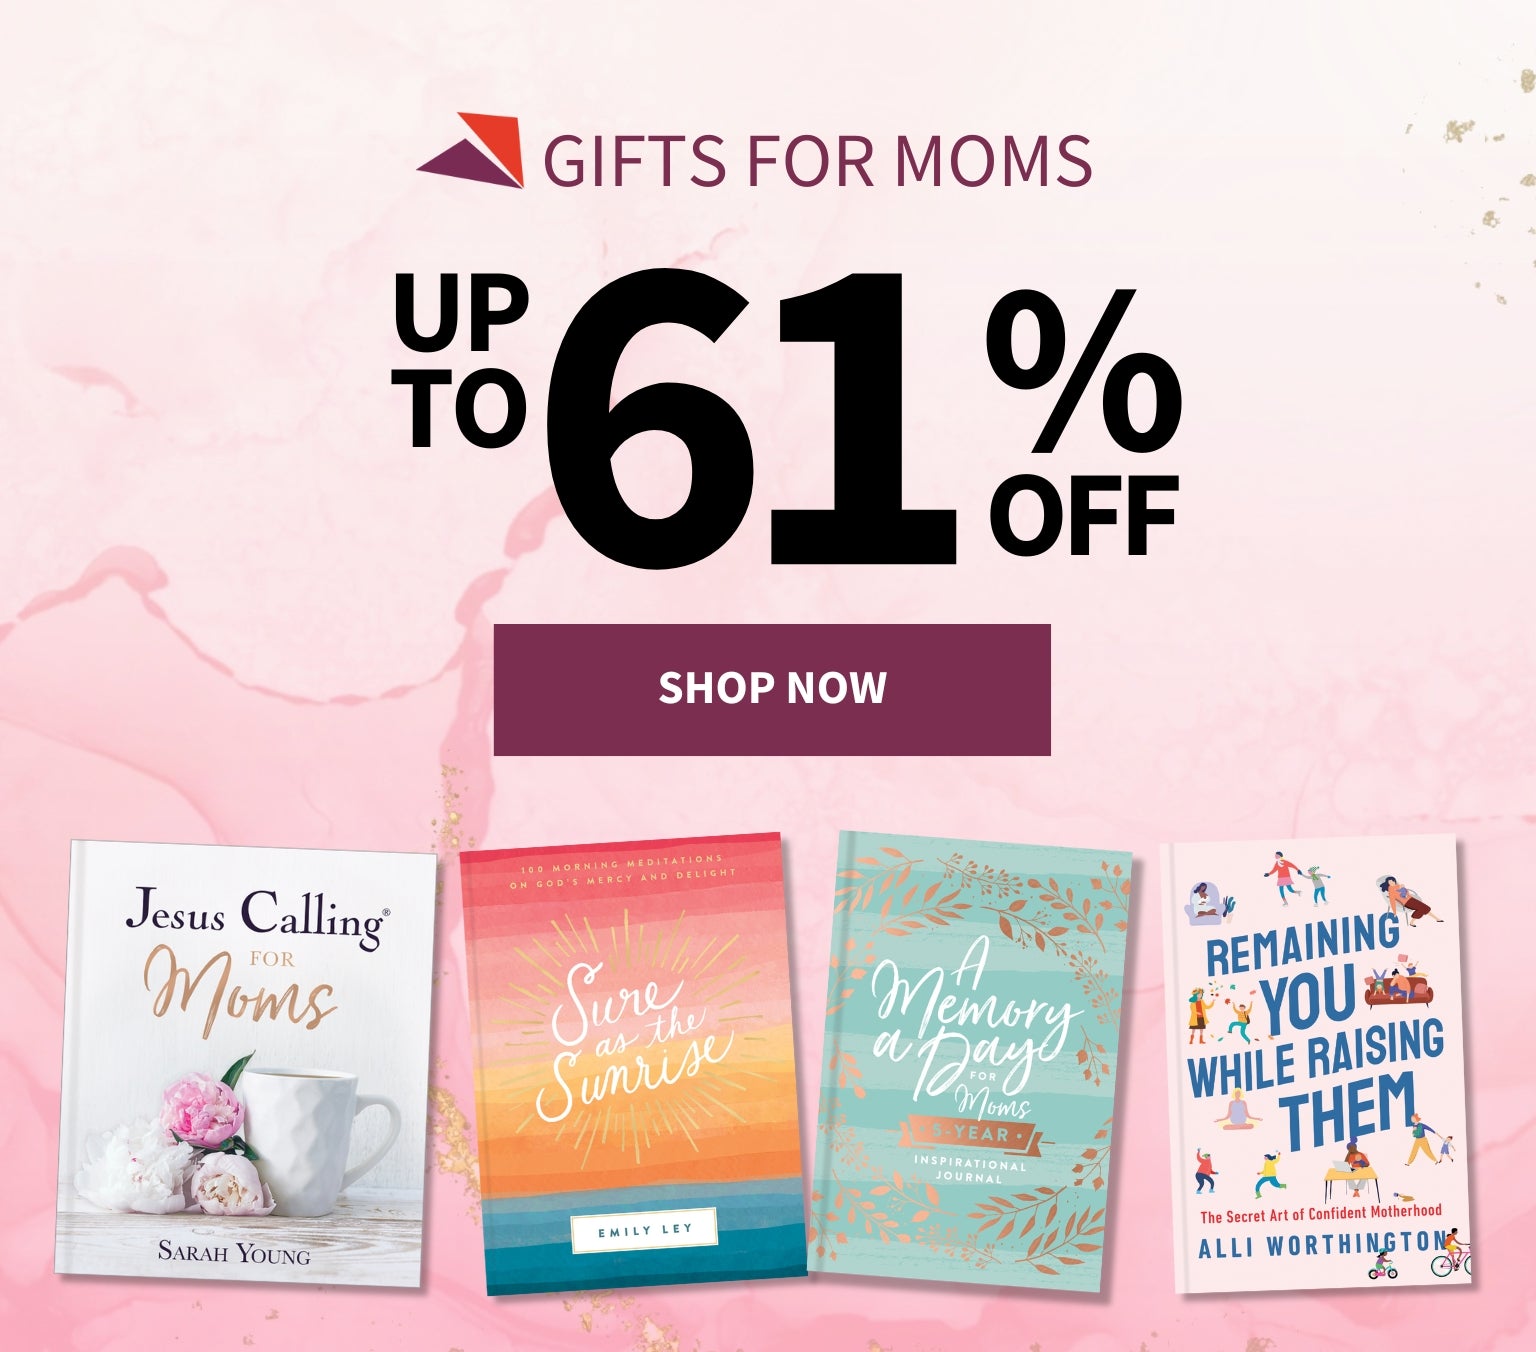 Up to 61% off Gifts for Moms